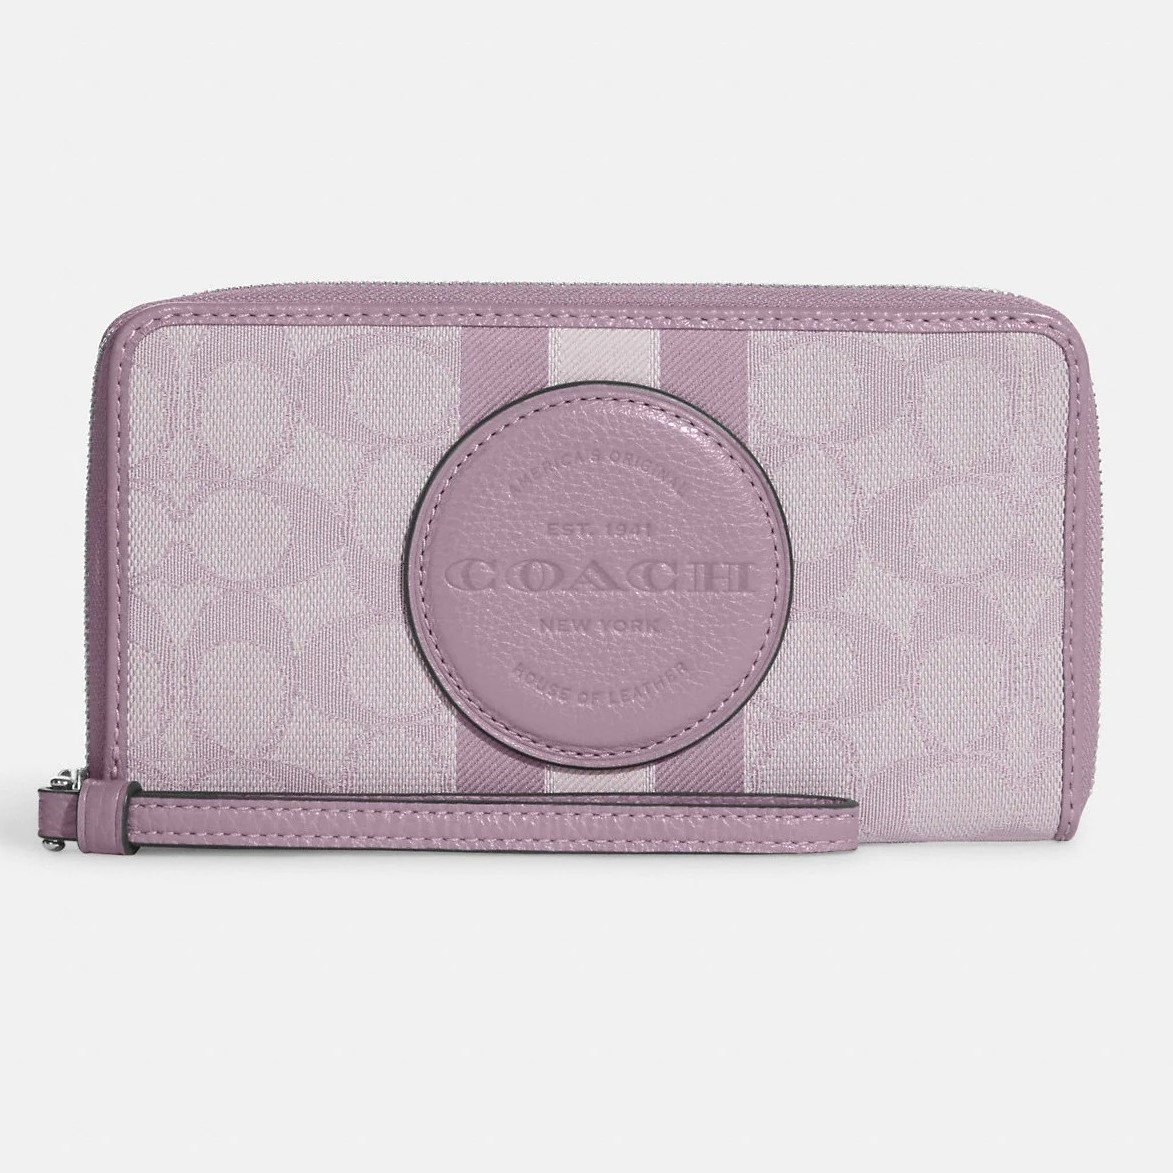 VÍ DÀI NỮ COACH DEMPSEY LARGE PHONE WALLET IN SIGNATURE JACQUARD WITH STRIPE AND COACH PATCH 4